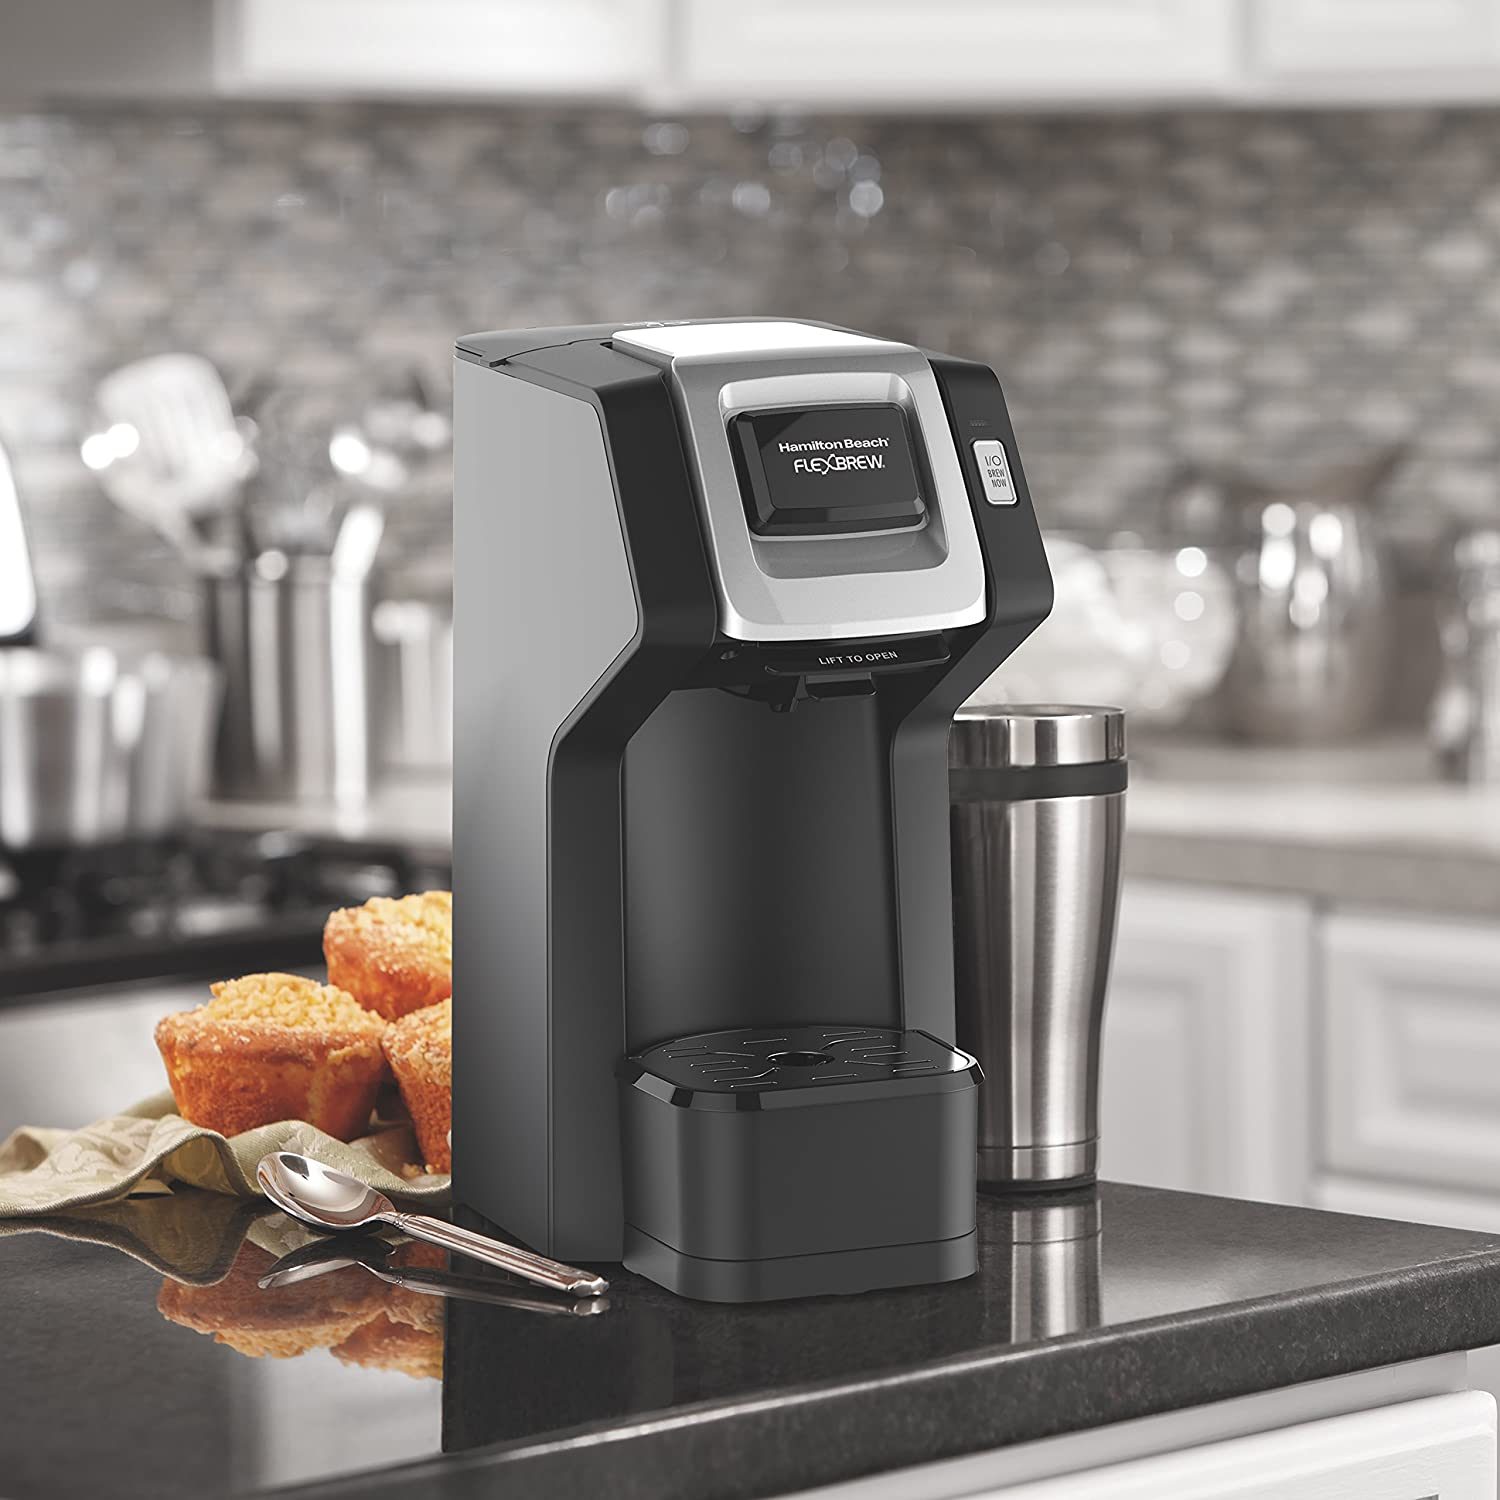 4 Best Coffee Makers for RV In 2023 